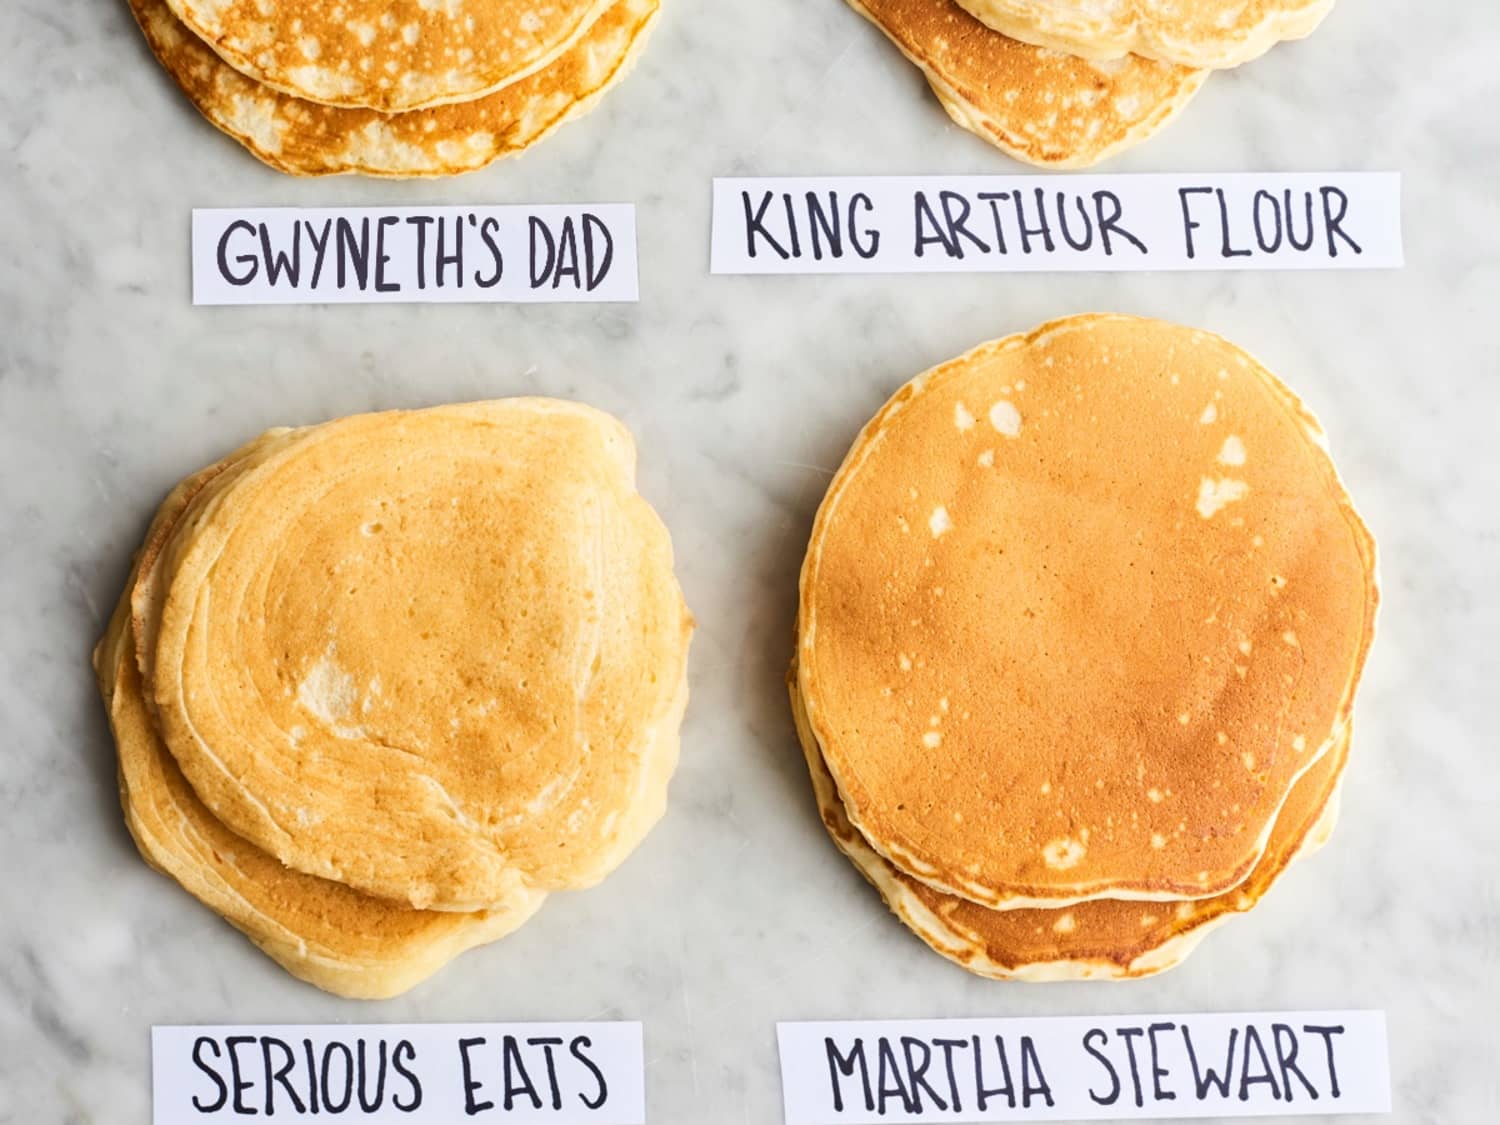 We Tried 4 Popular Pancake Recipes — Here's the Best | Kitchn